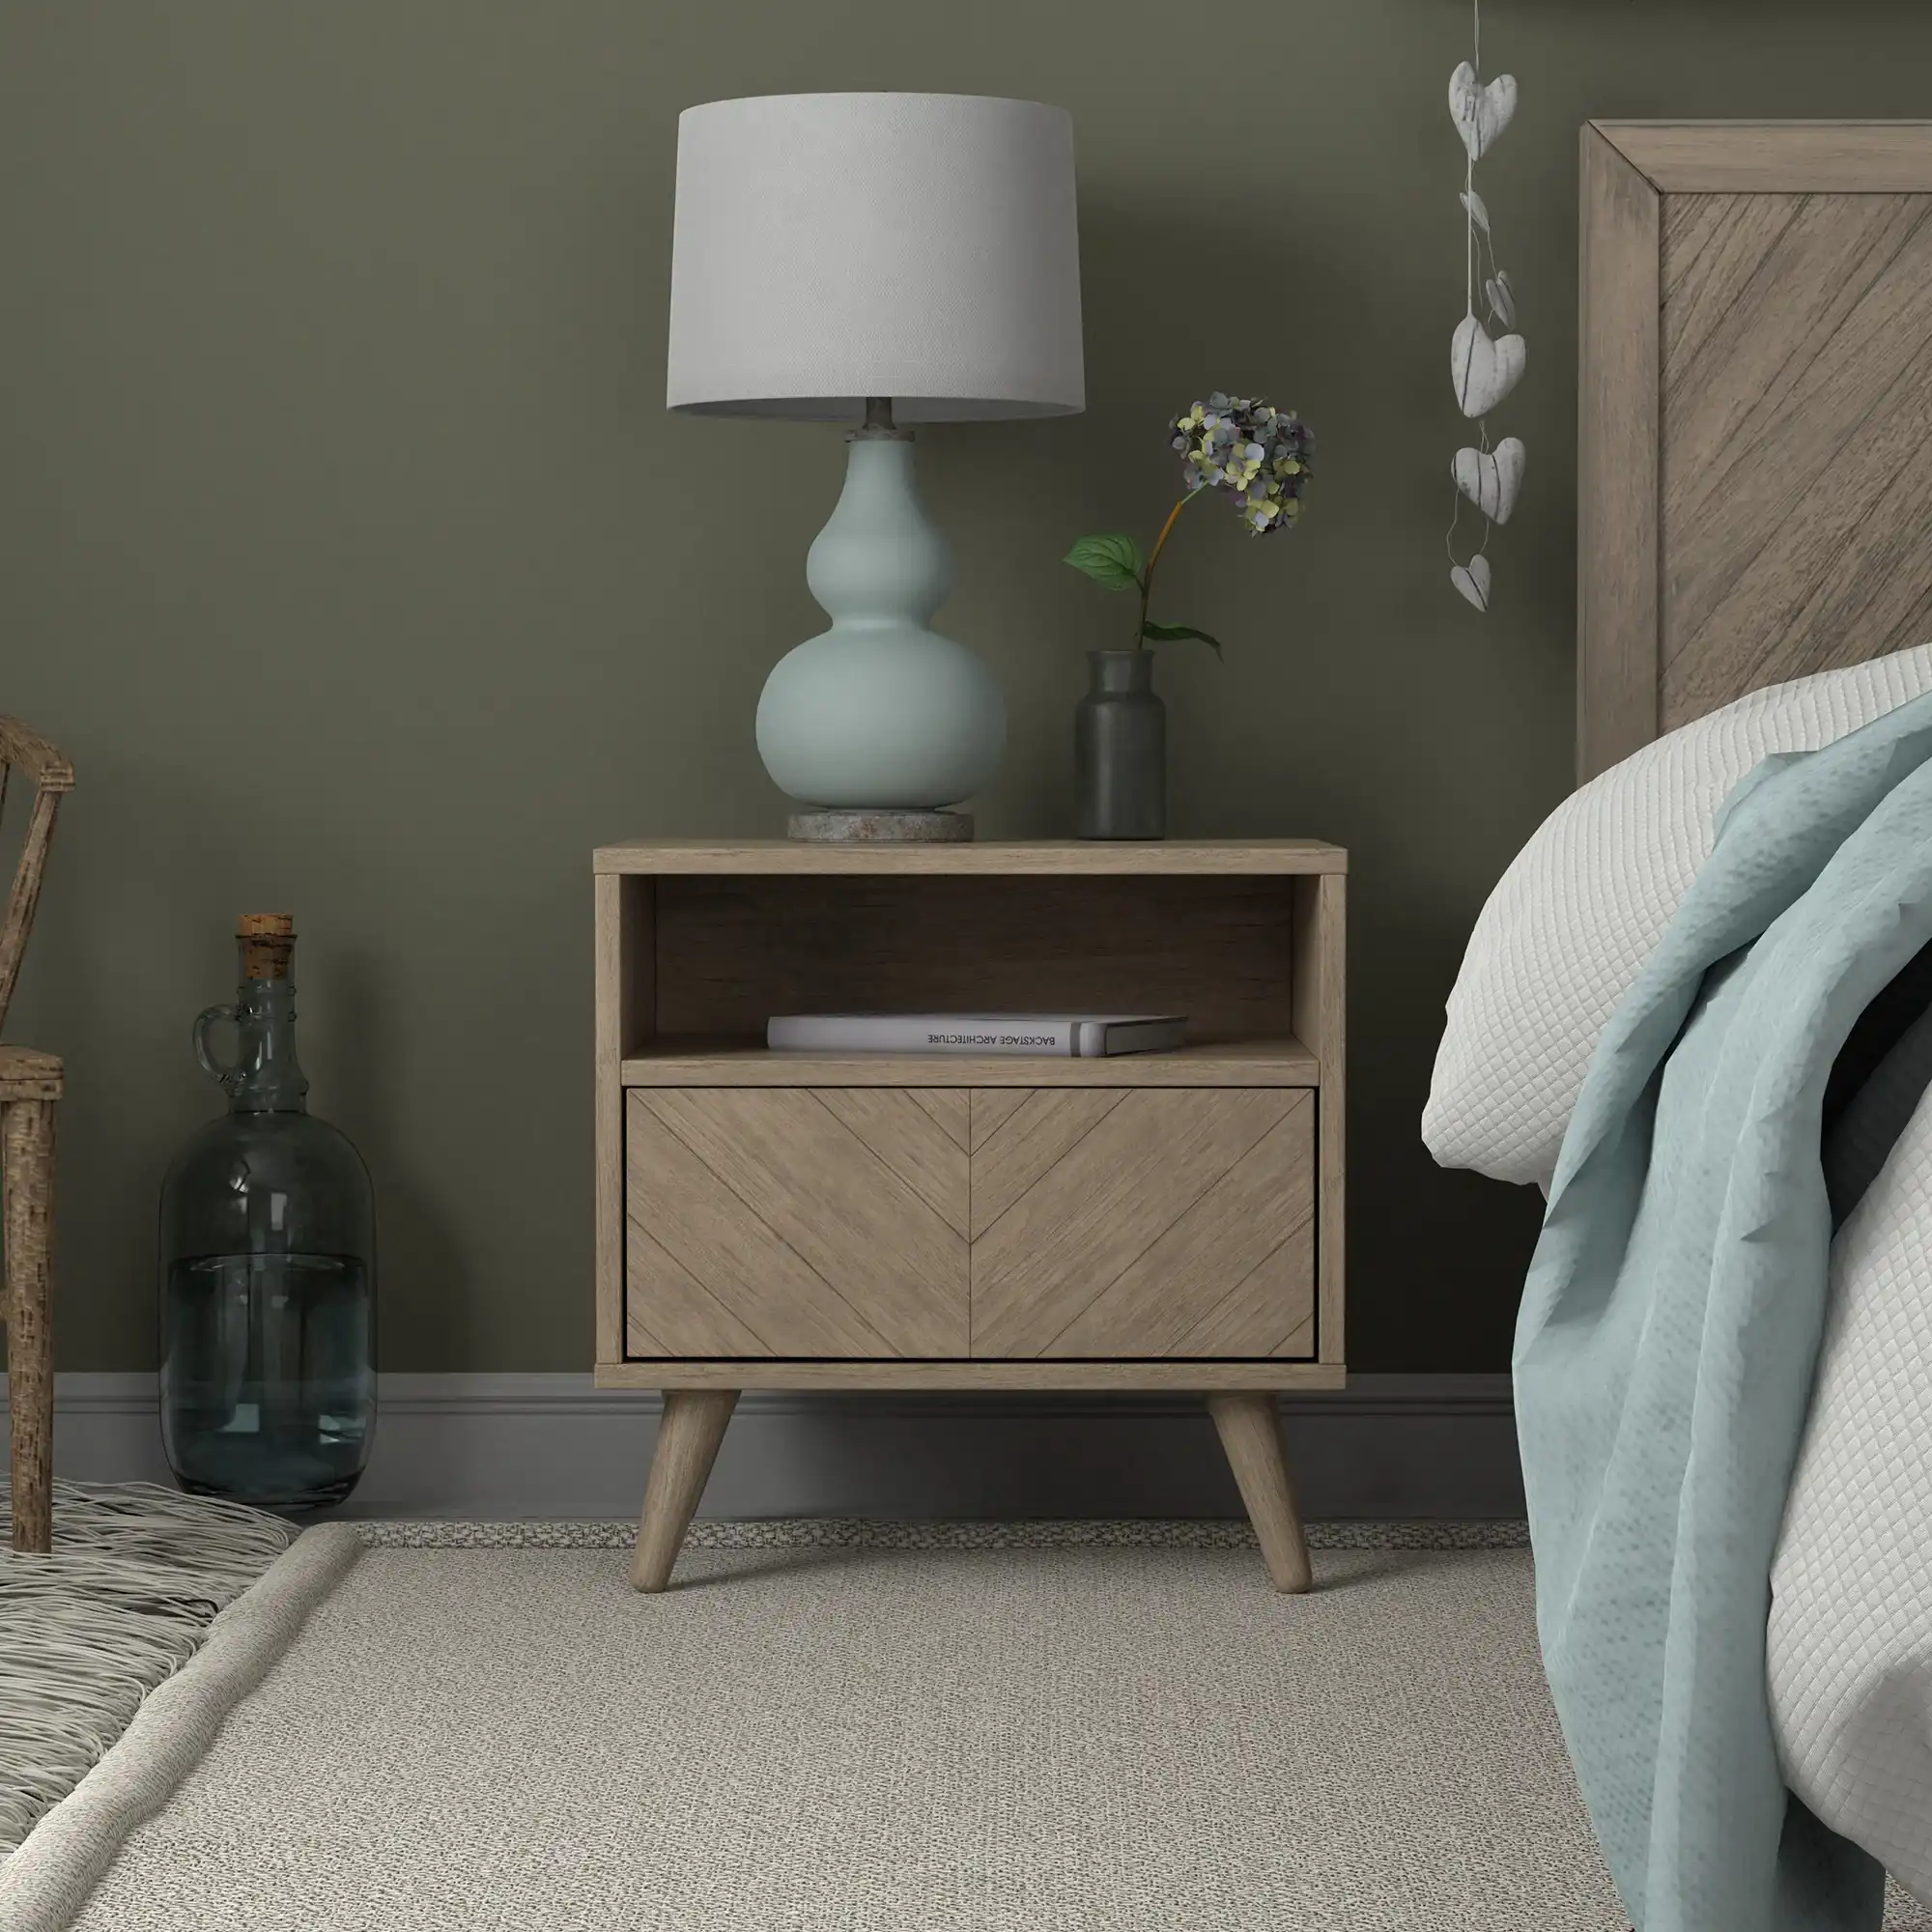 the bedside table will help you keep important things in order